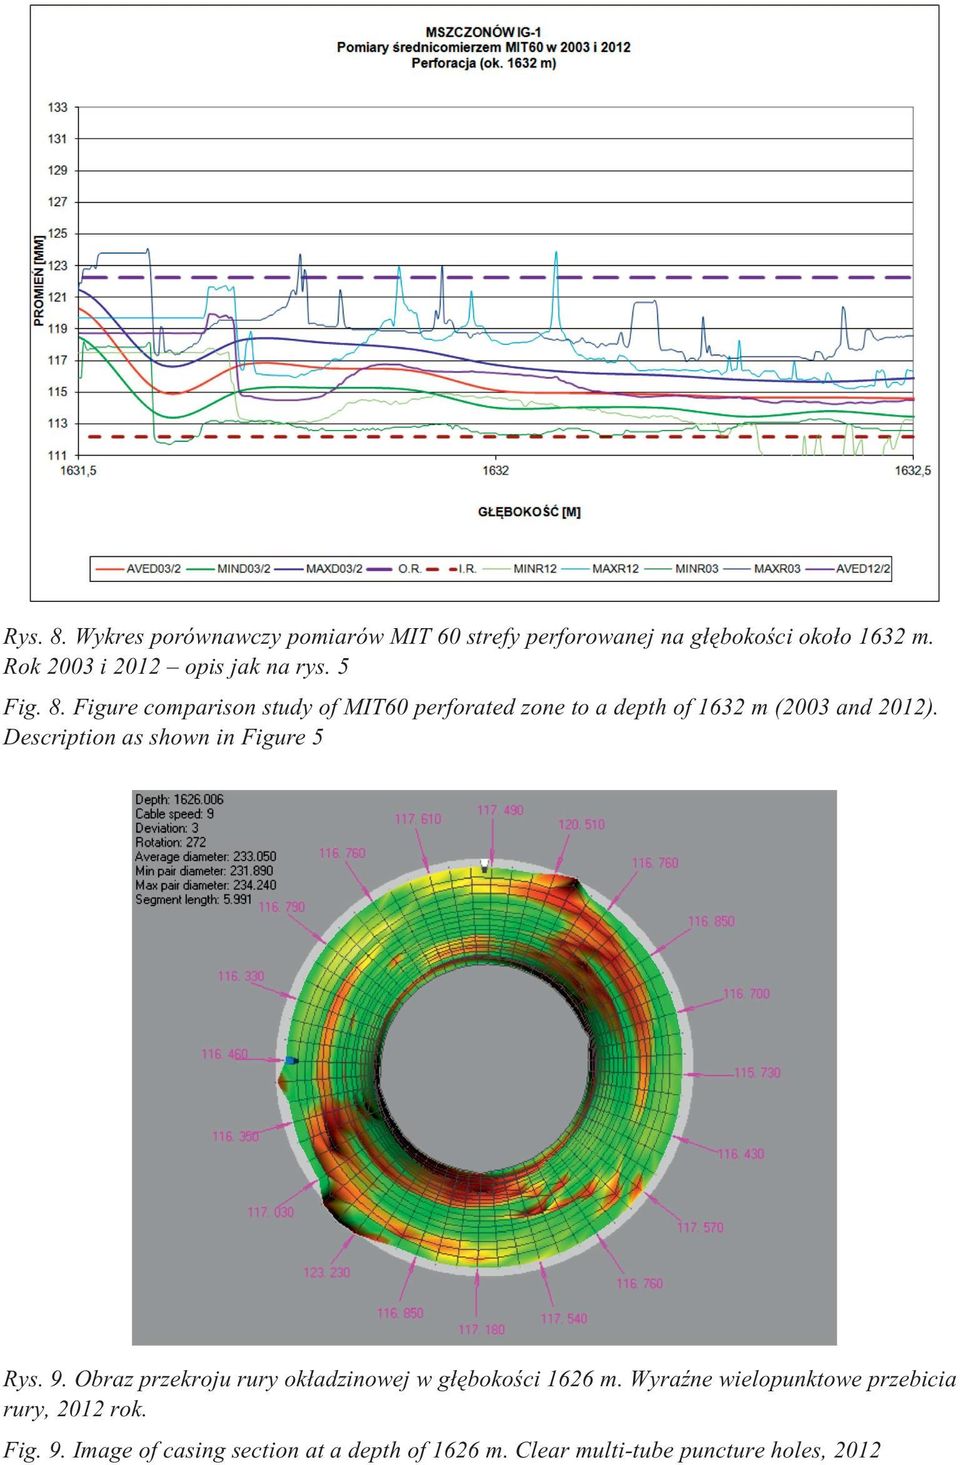 Figure comparison study of MIT60 perforated zone to a depth of 1632 m (2003 and 2012).